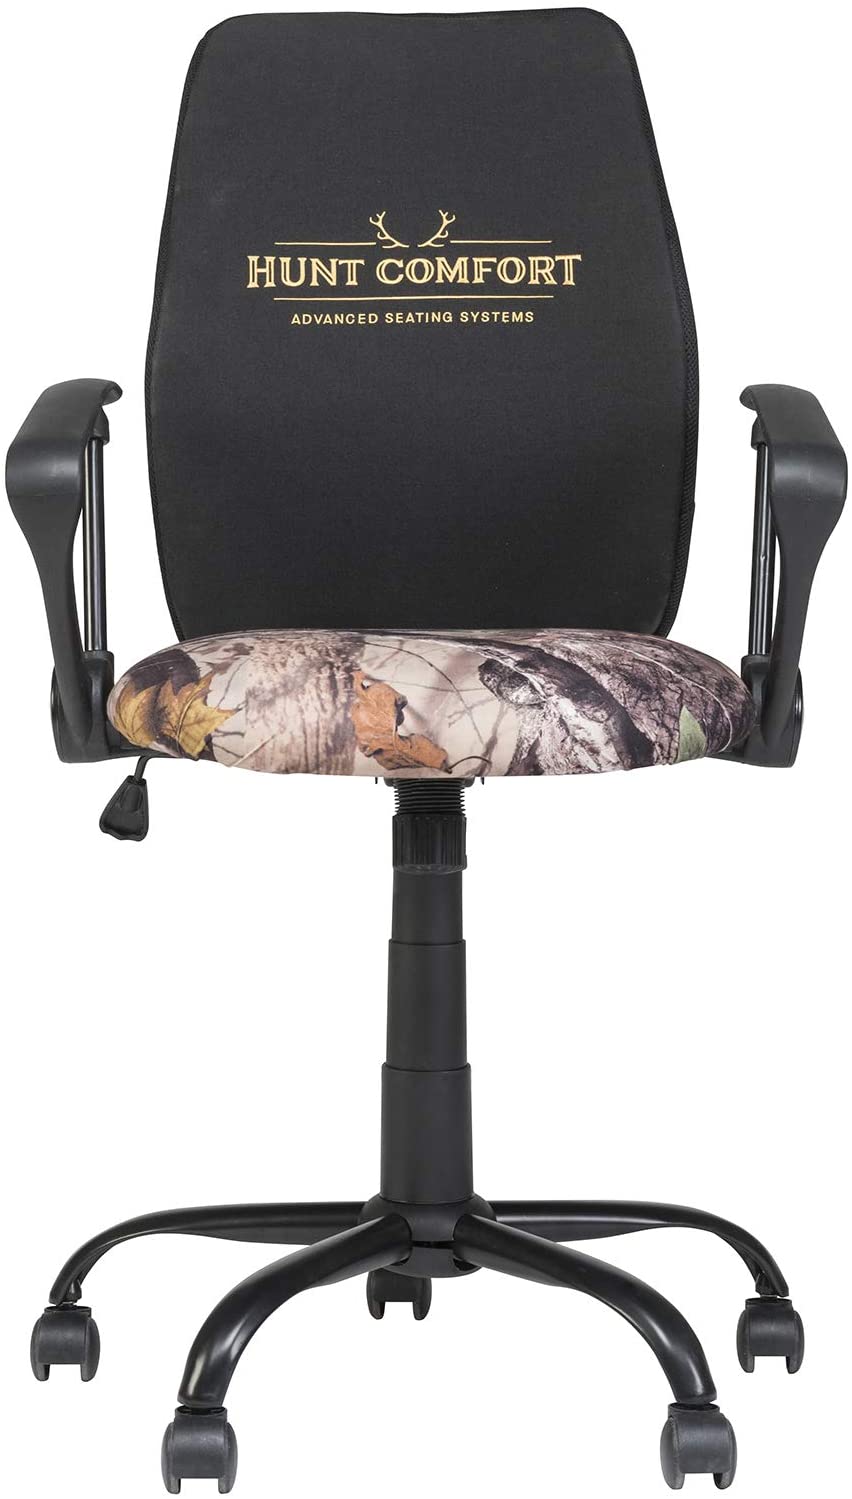 Top 10 Best Hunting chair that swivels 10